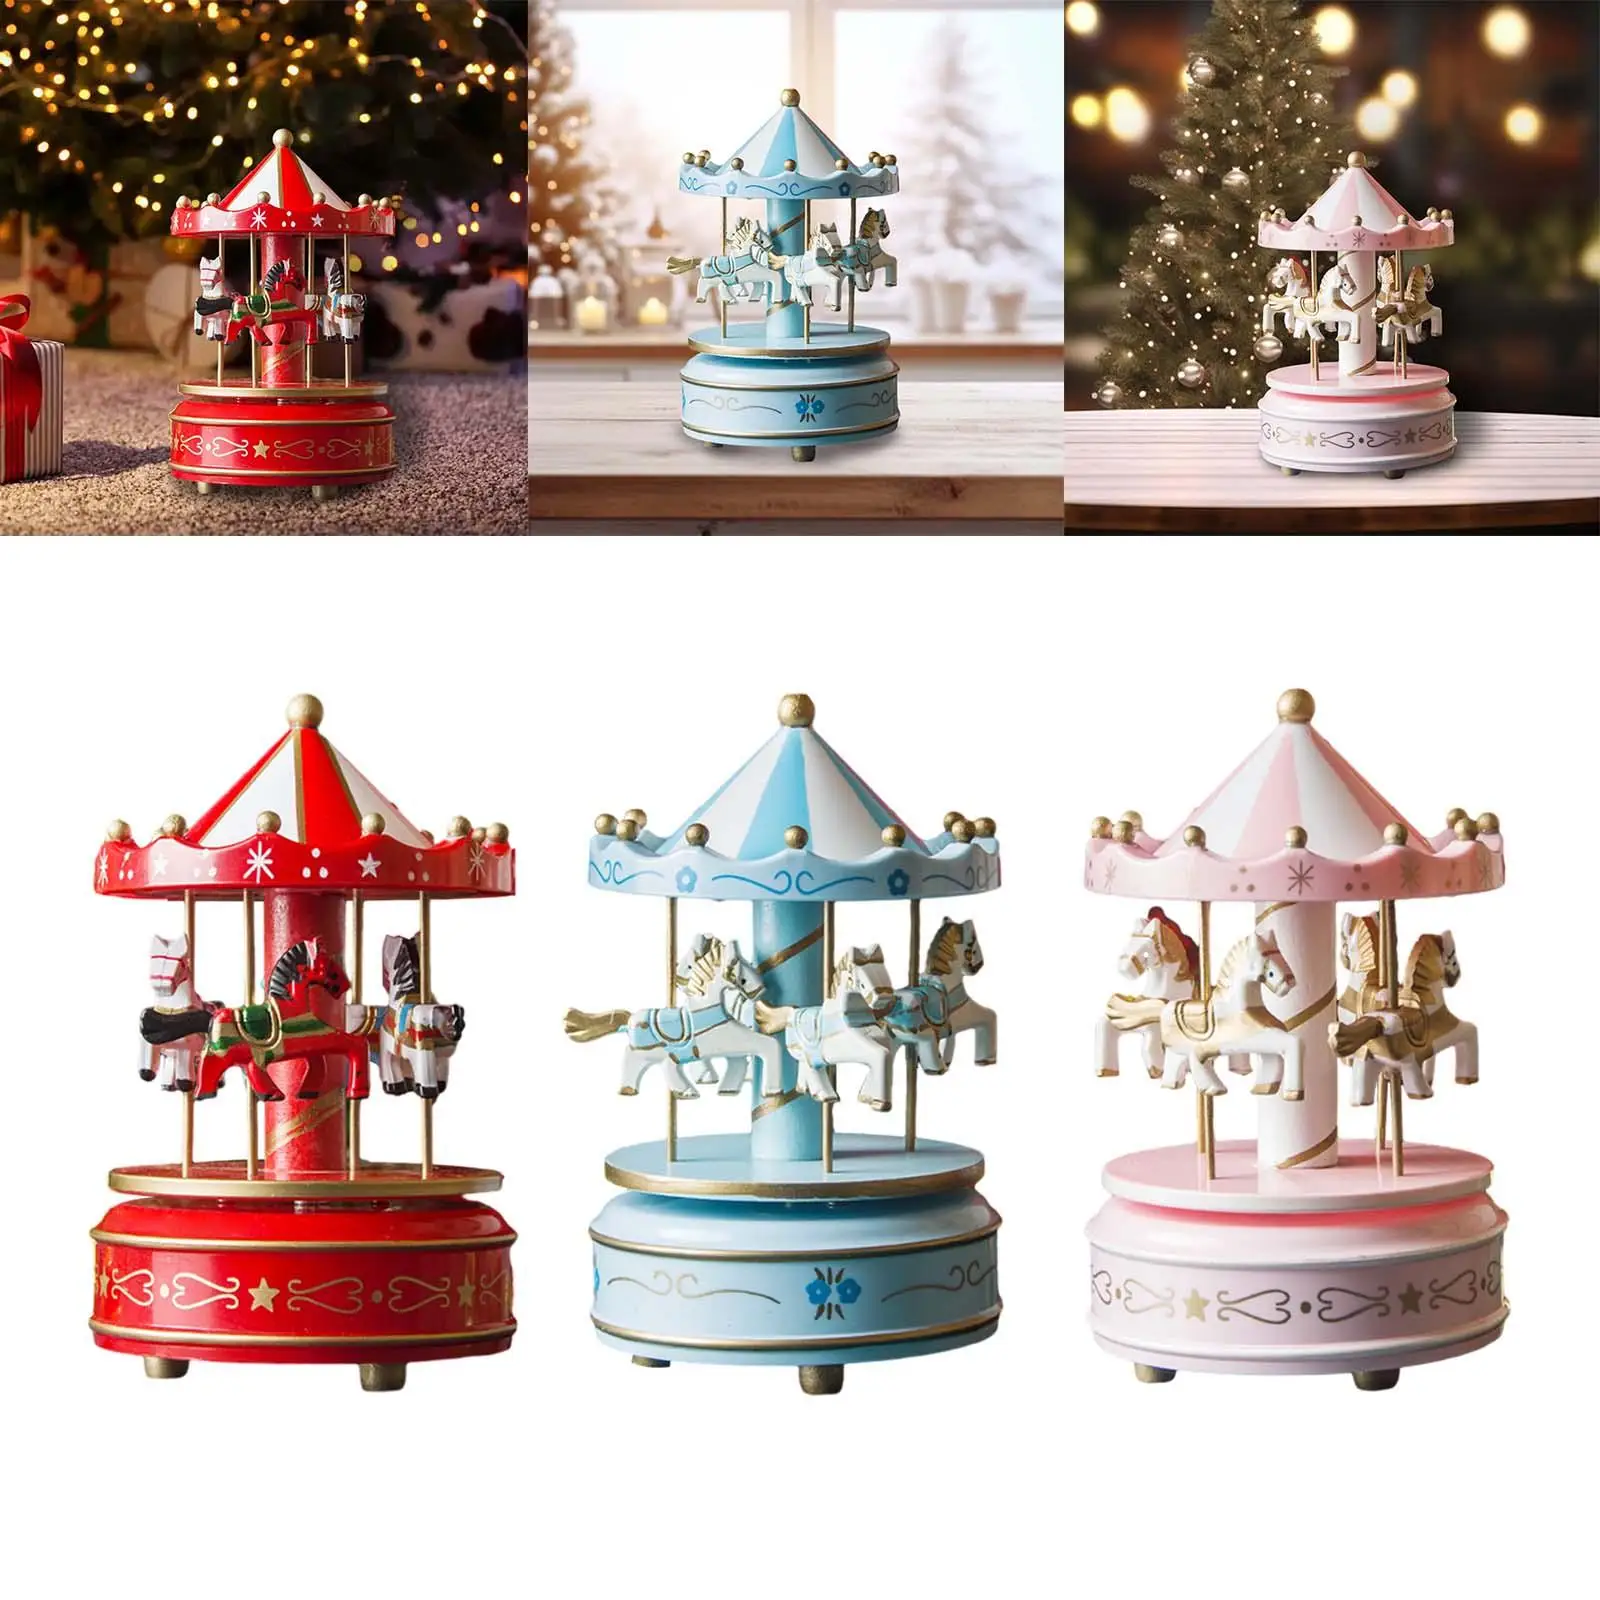 Christmas Wooden Carousel Music Box Ornament Hand Painted Turn Horse Shaped Rotating for Valentine Gift Multipurpose